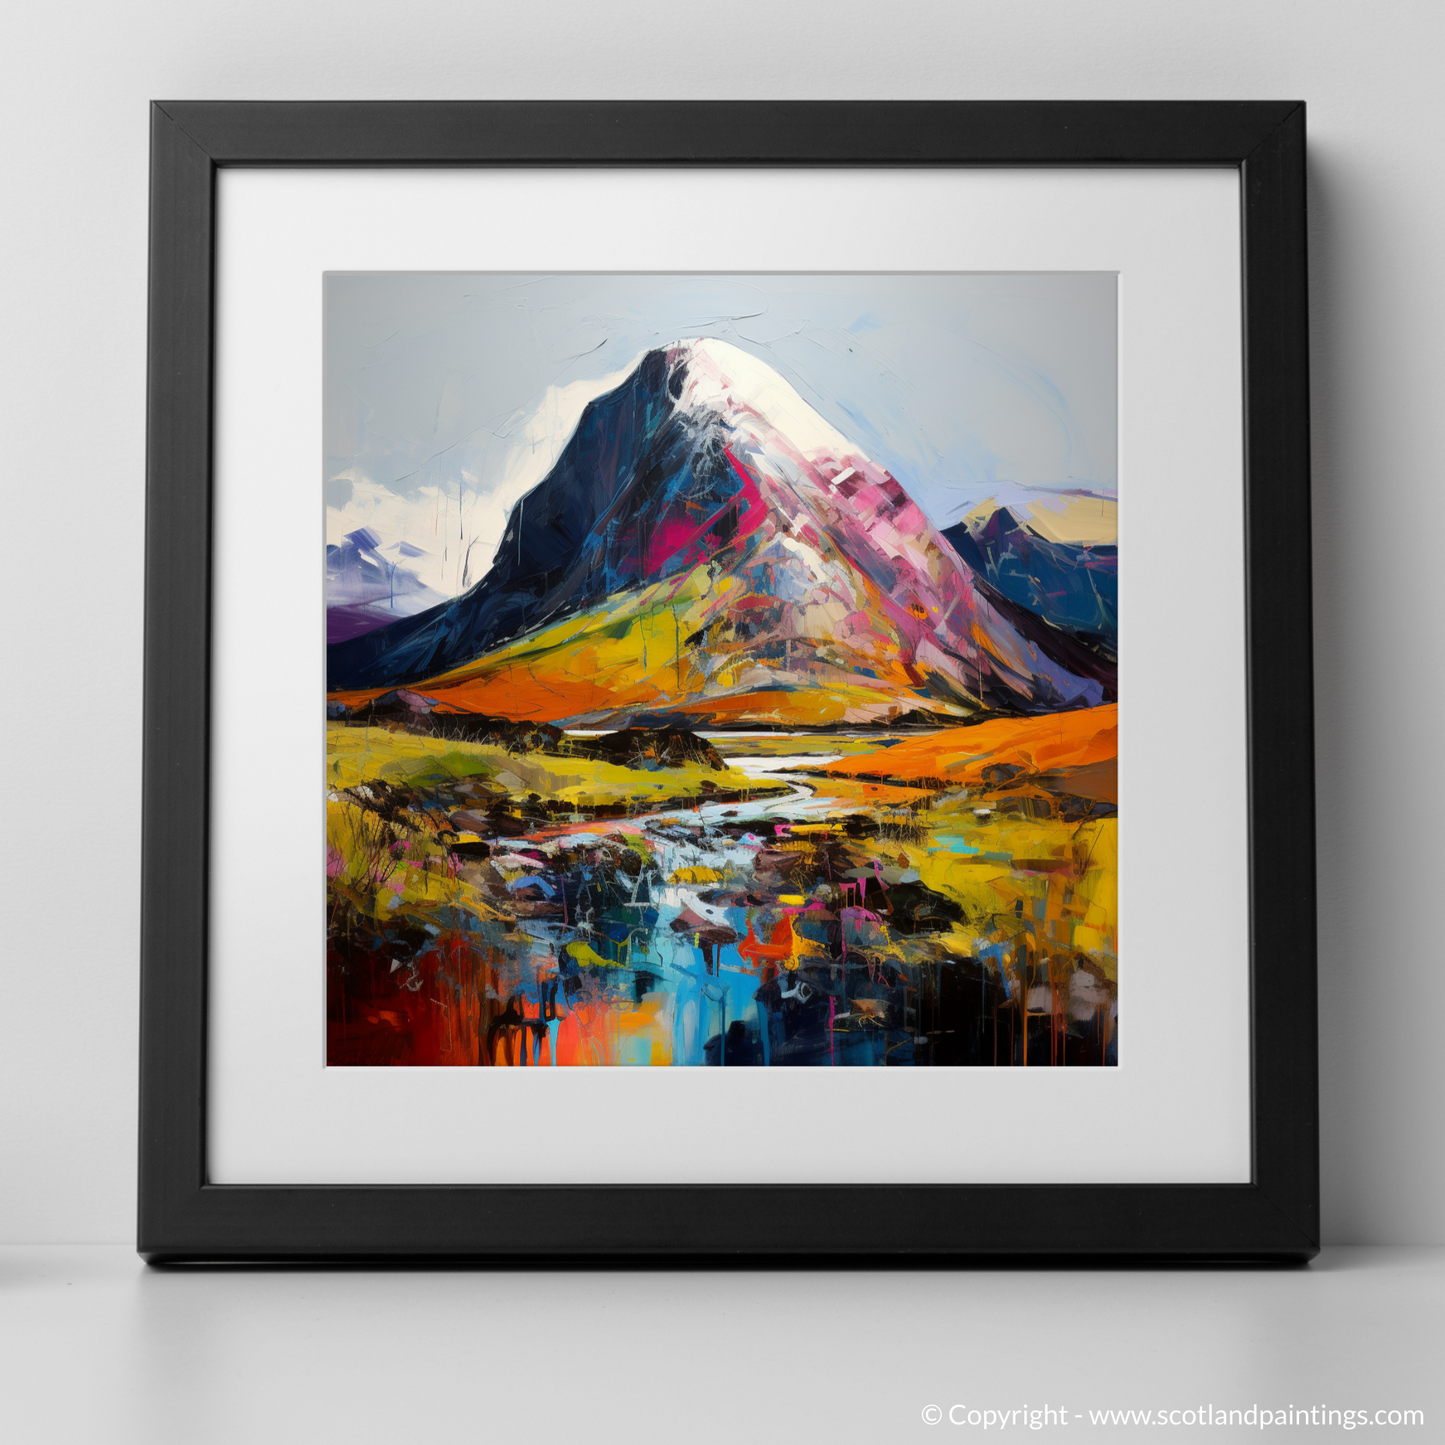 Painting and Art Print of Ben Nevis. Ben Nevis in Expressionist Colour Majesty.